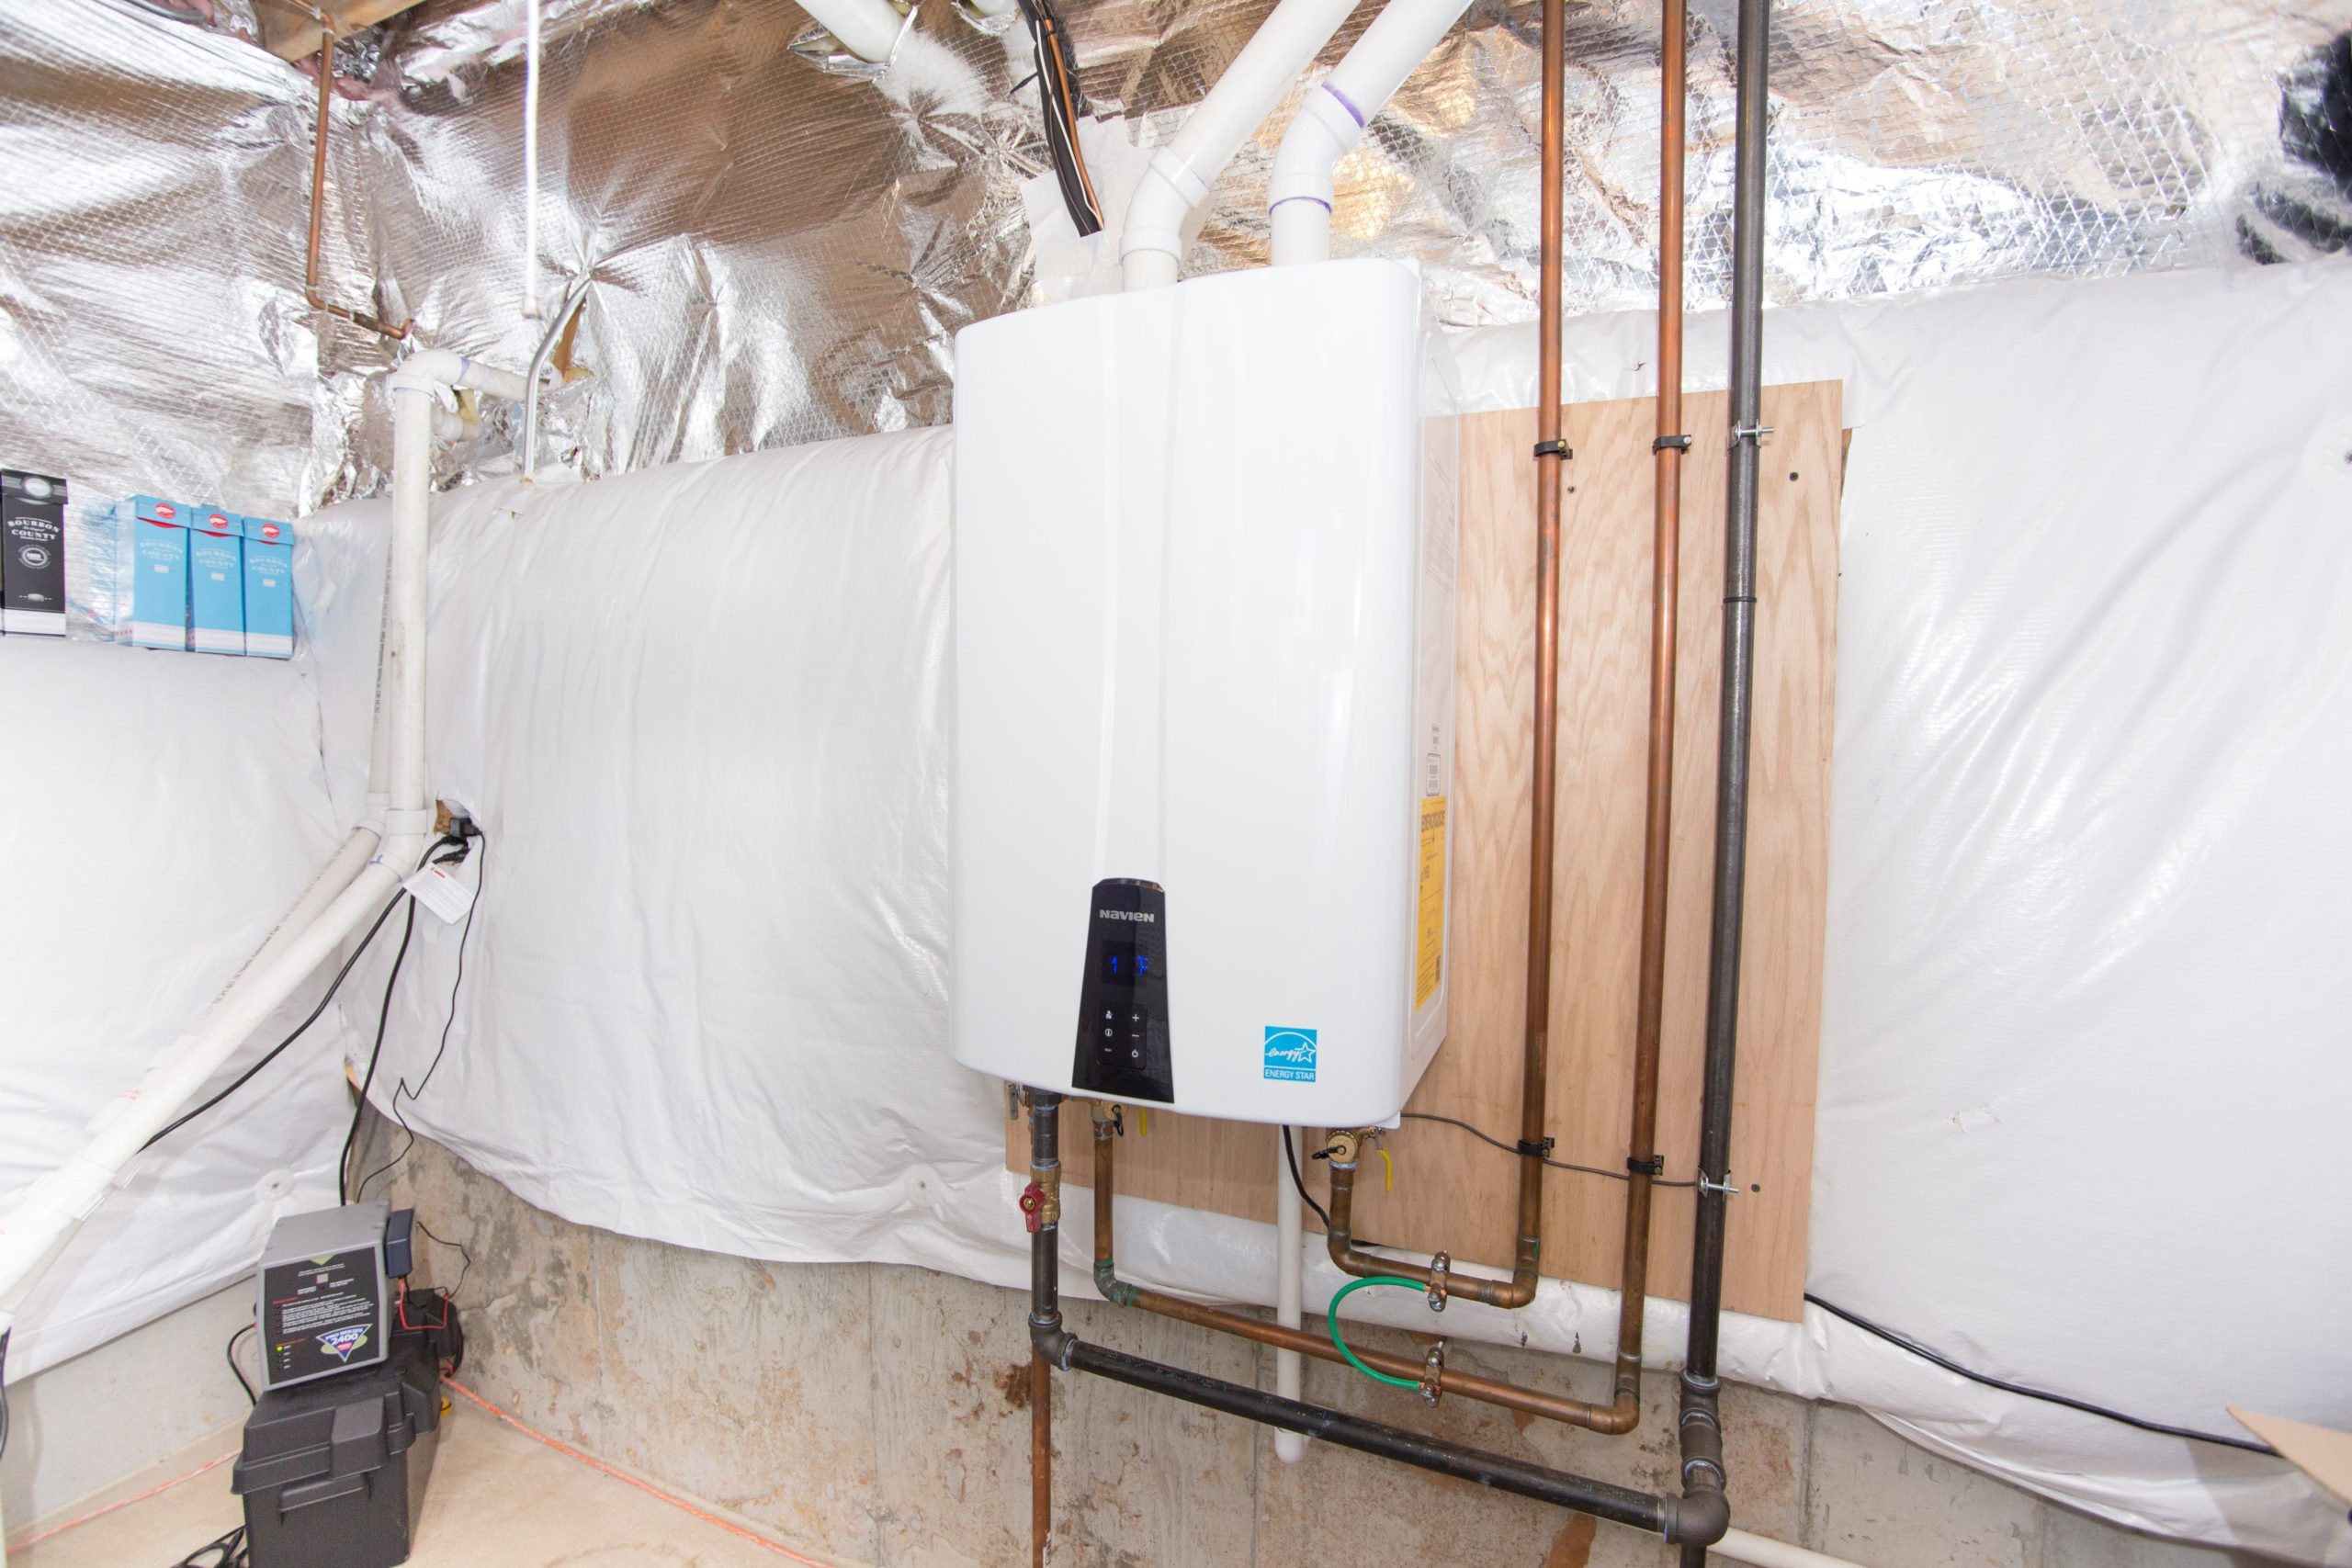 Tankless water heater system